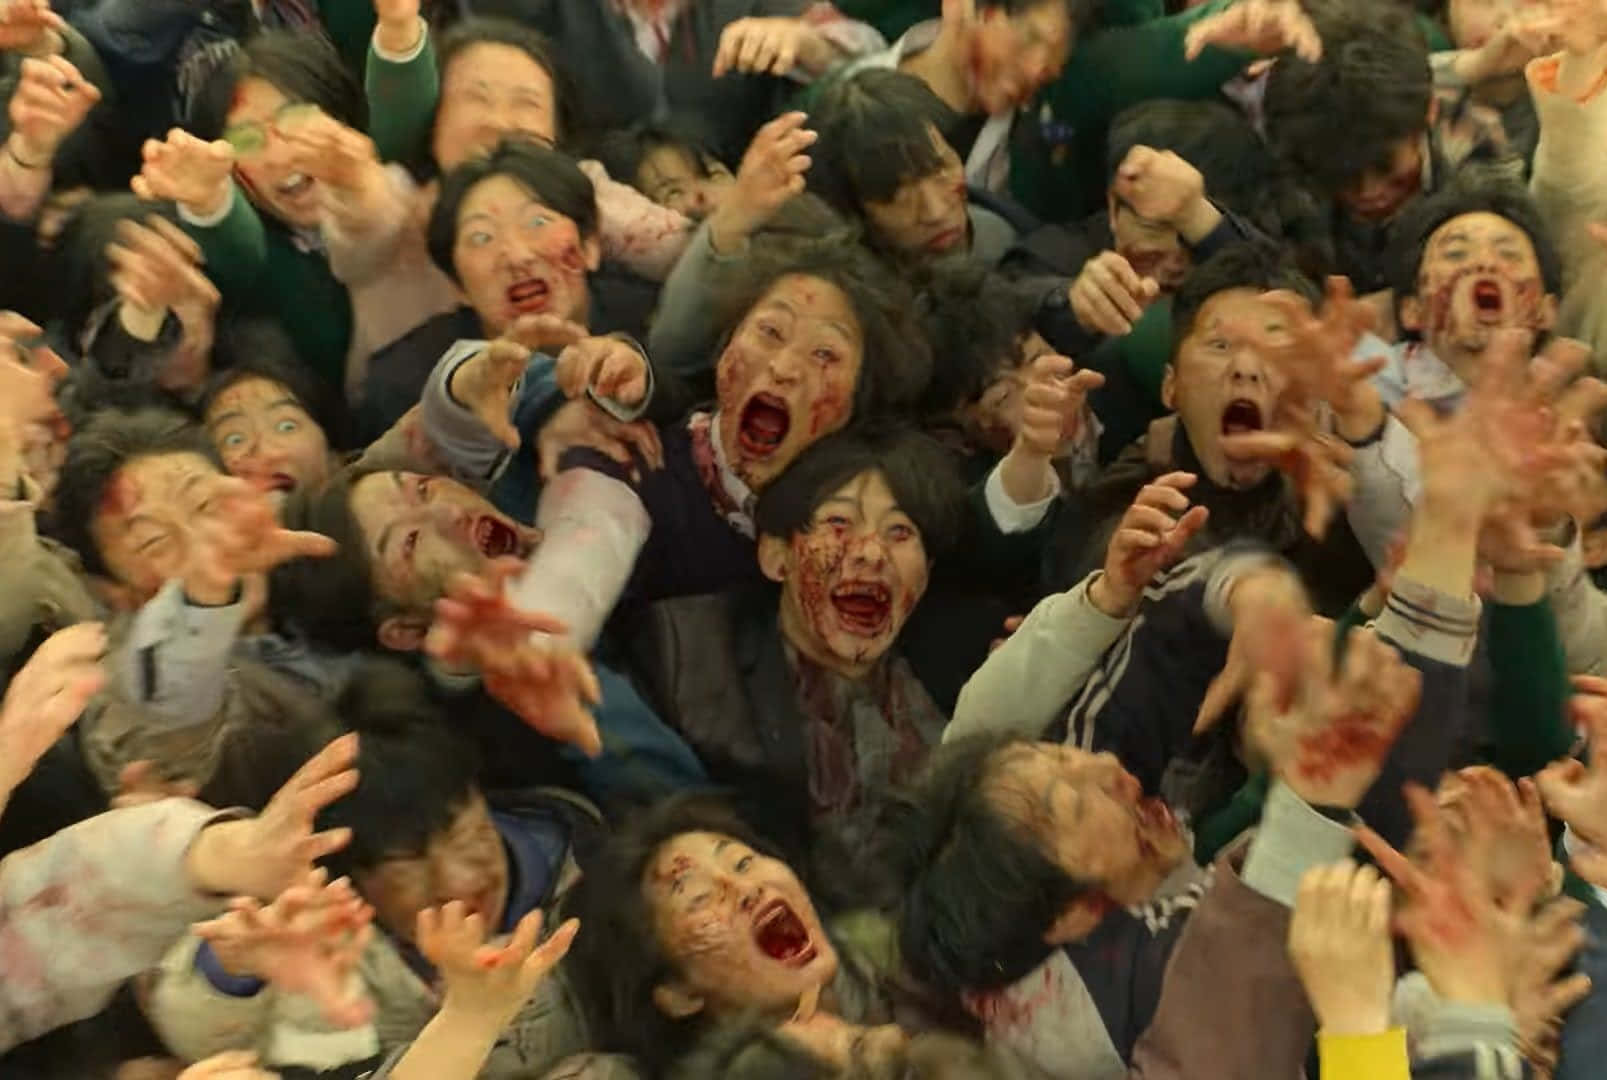 A Group Of People With Blood On Their Faces